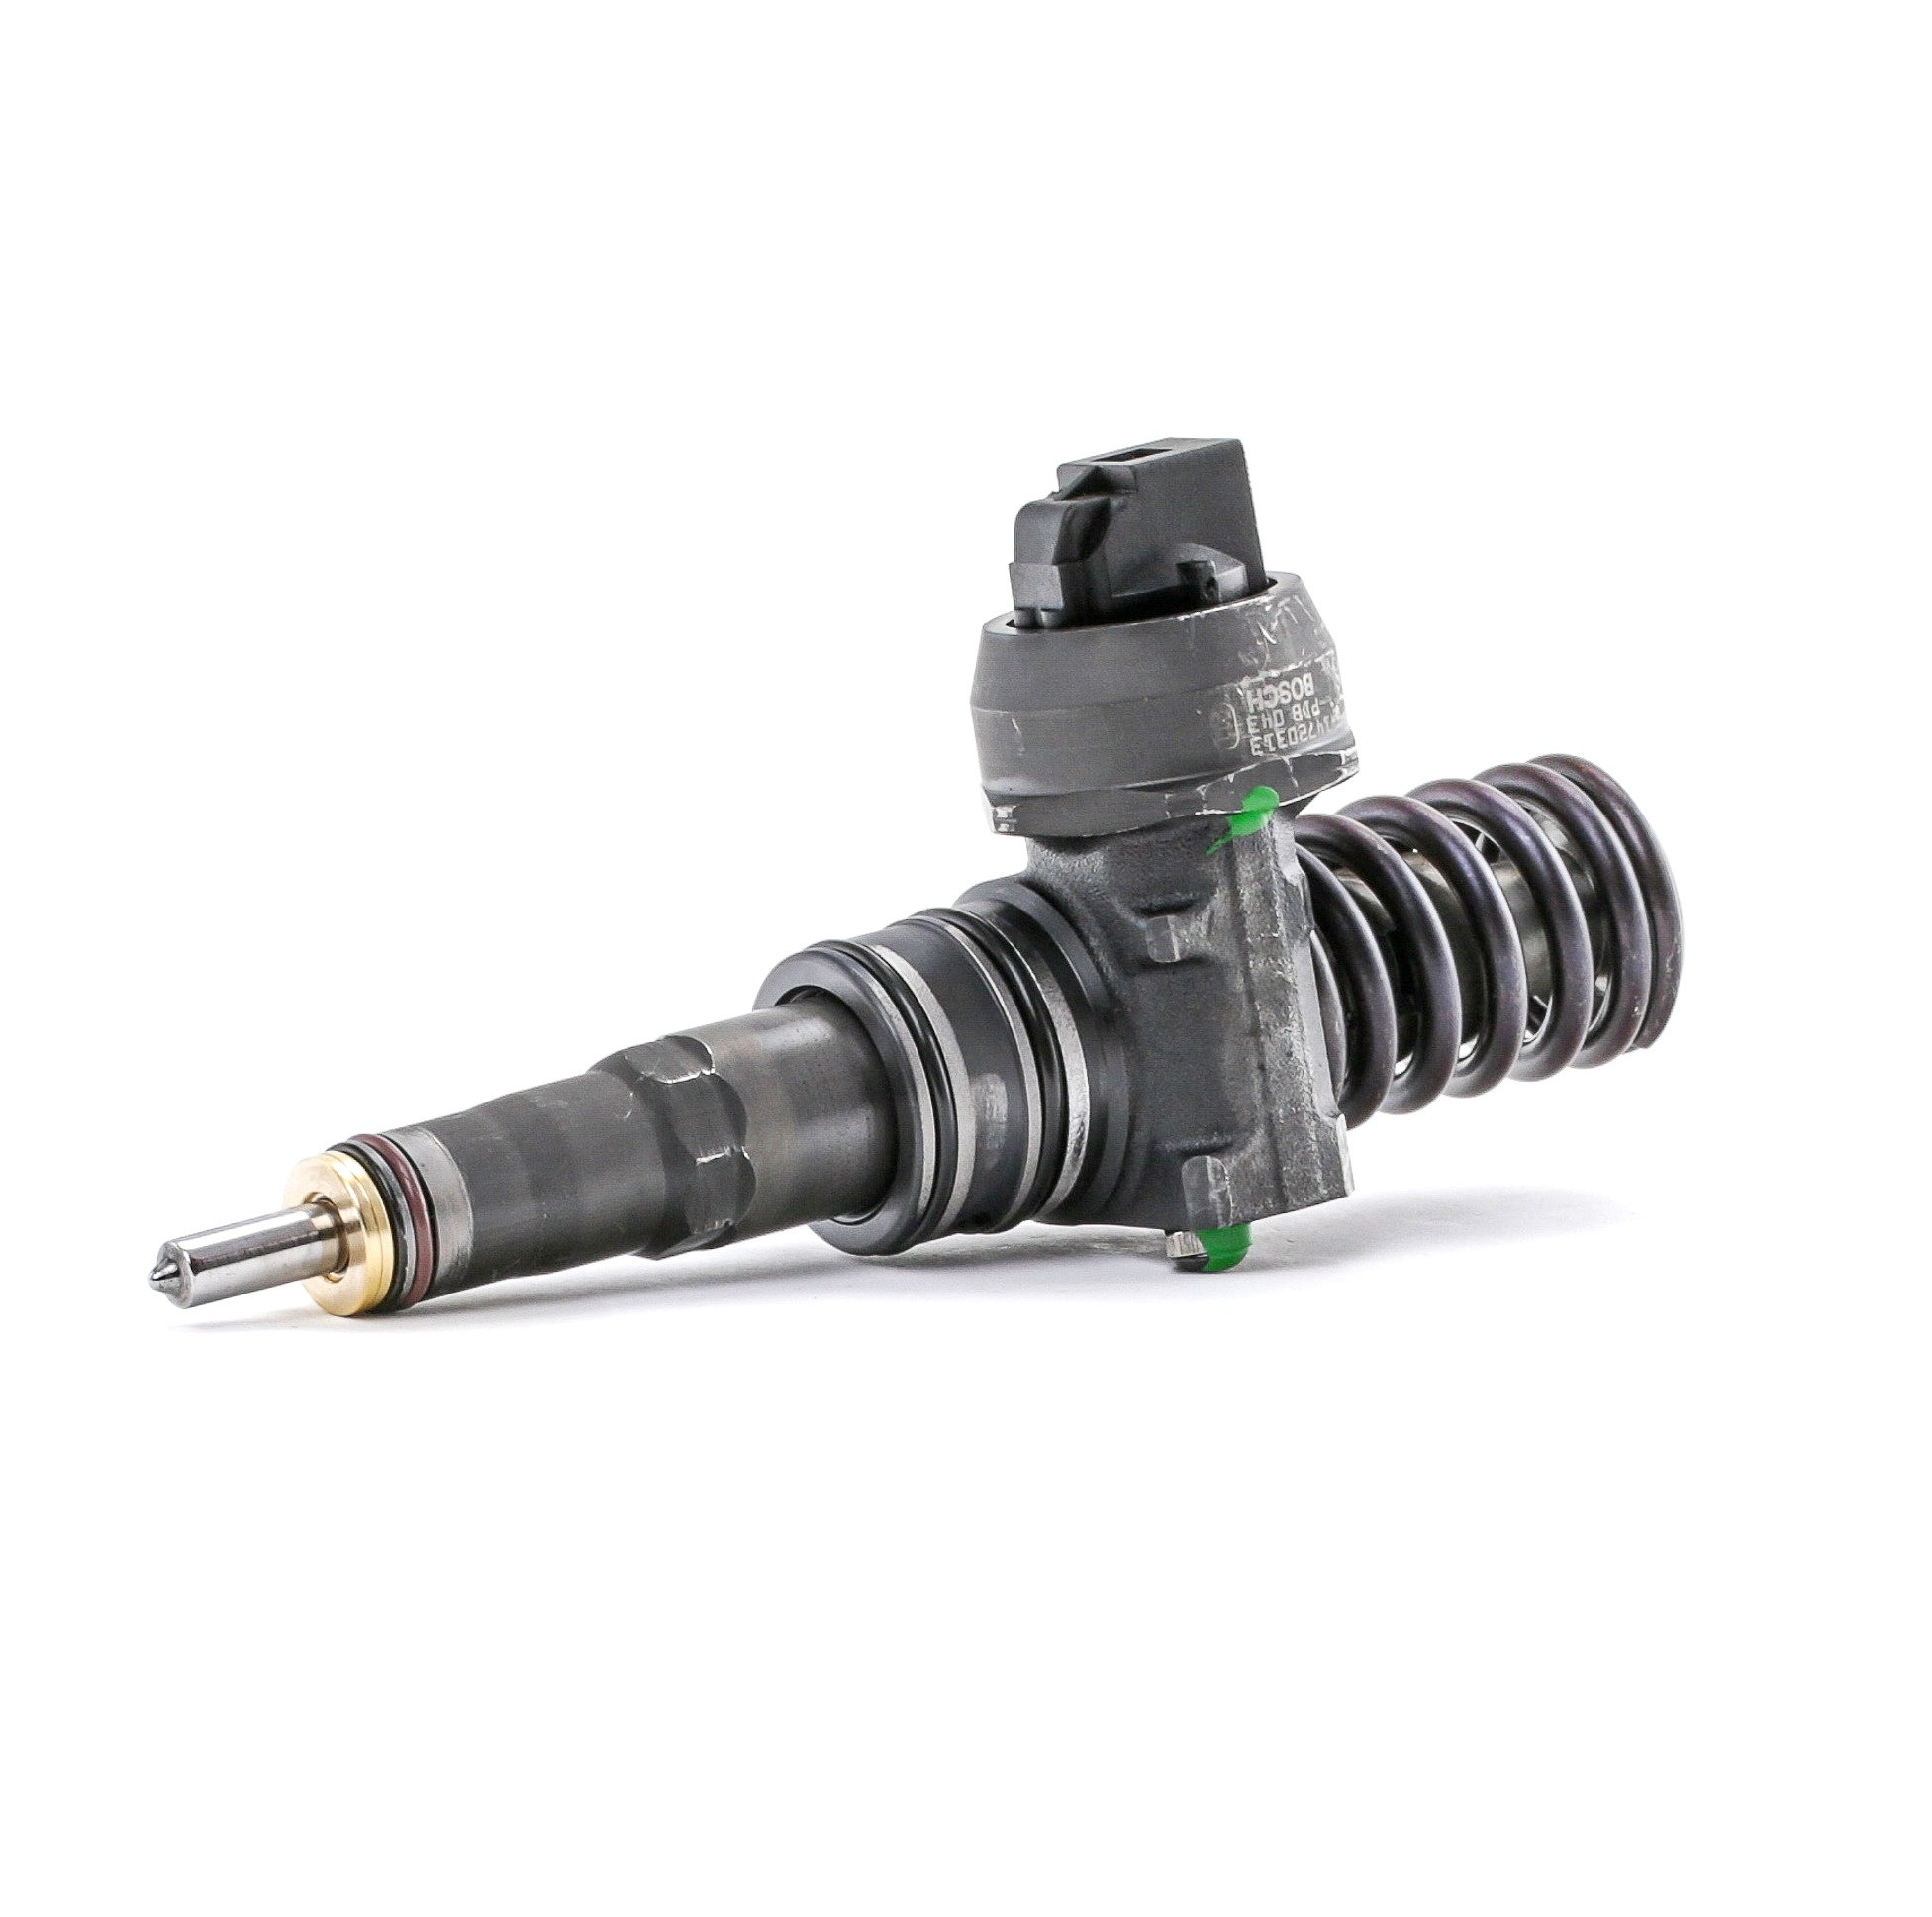 RIDEX REMAN Injector diesel and petrol Audi A3 Convertible new 3930I0007R